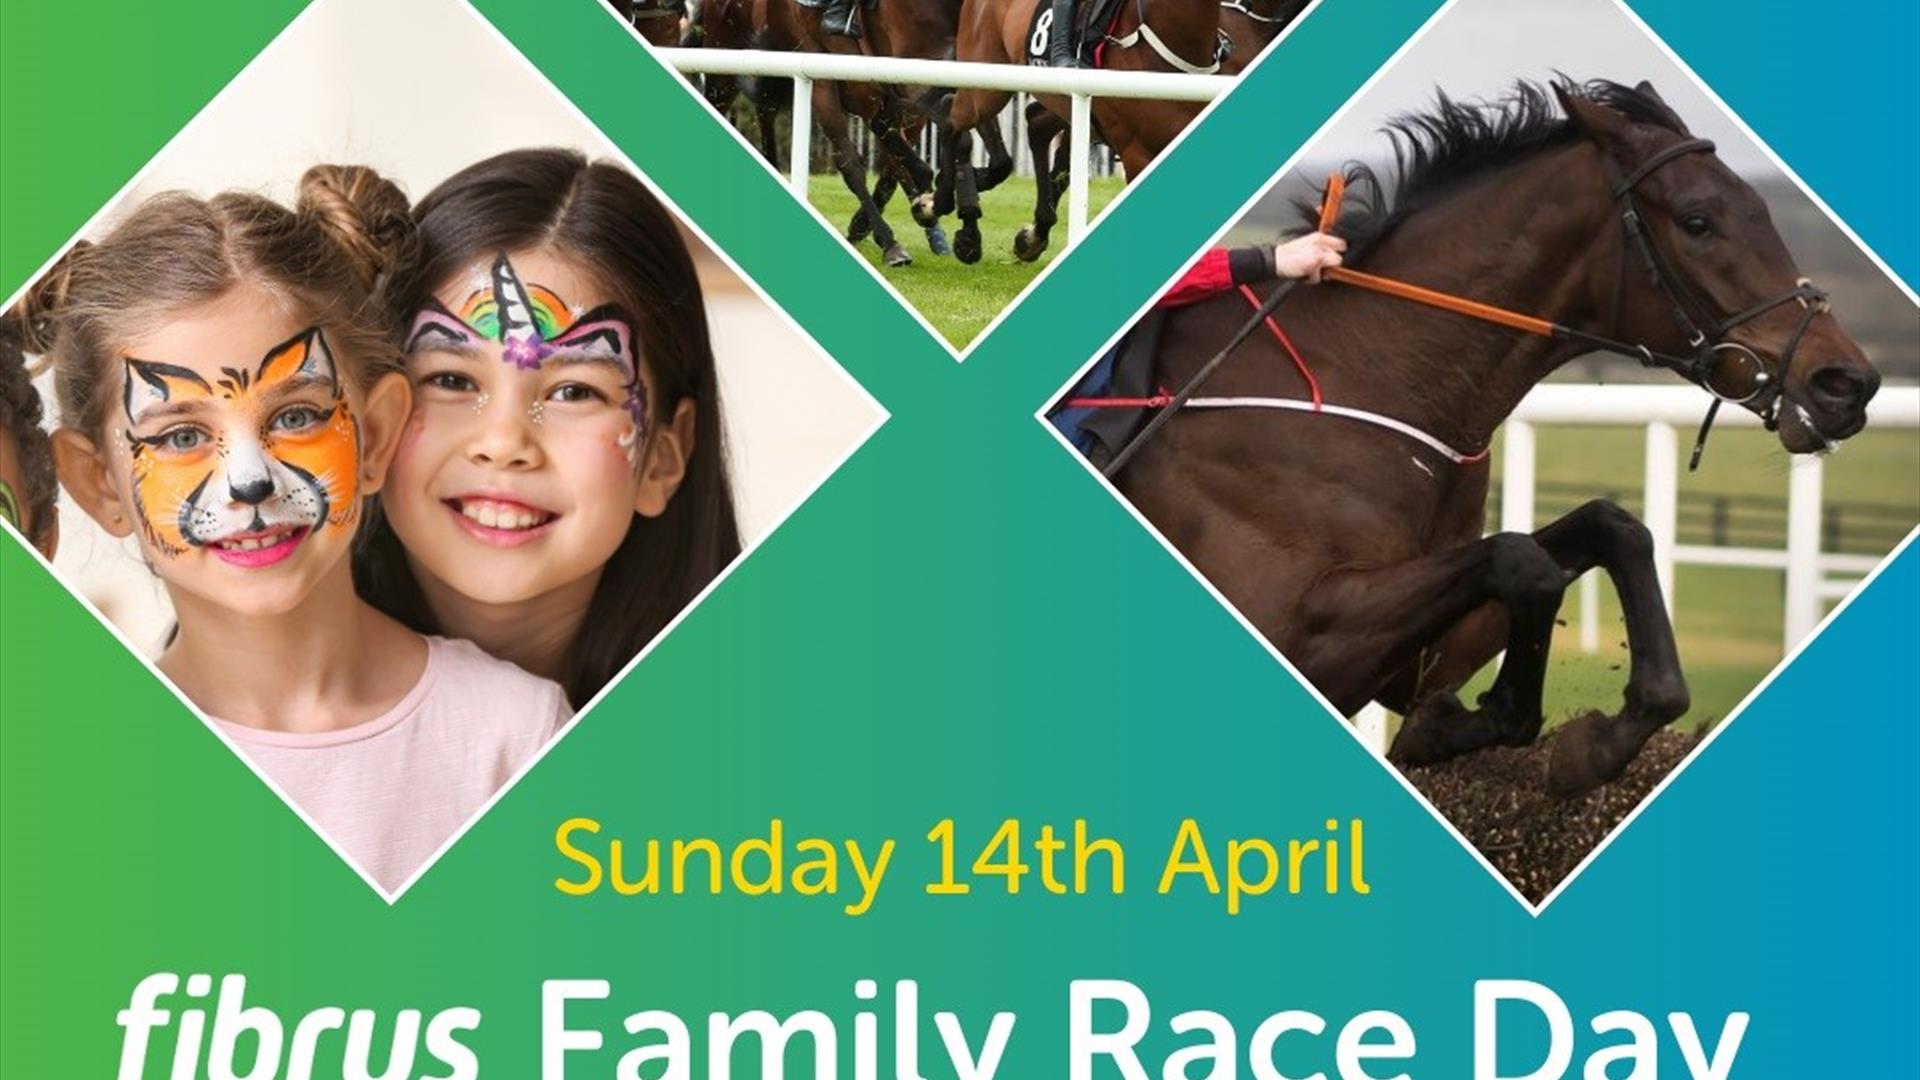 Image is of children's face painting  and horses jumping over steeples at Down Royal Racecourse